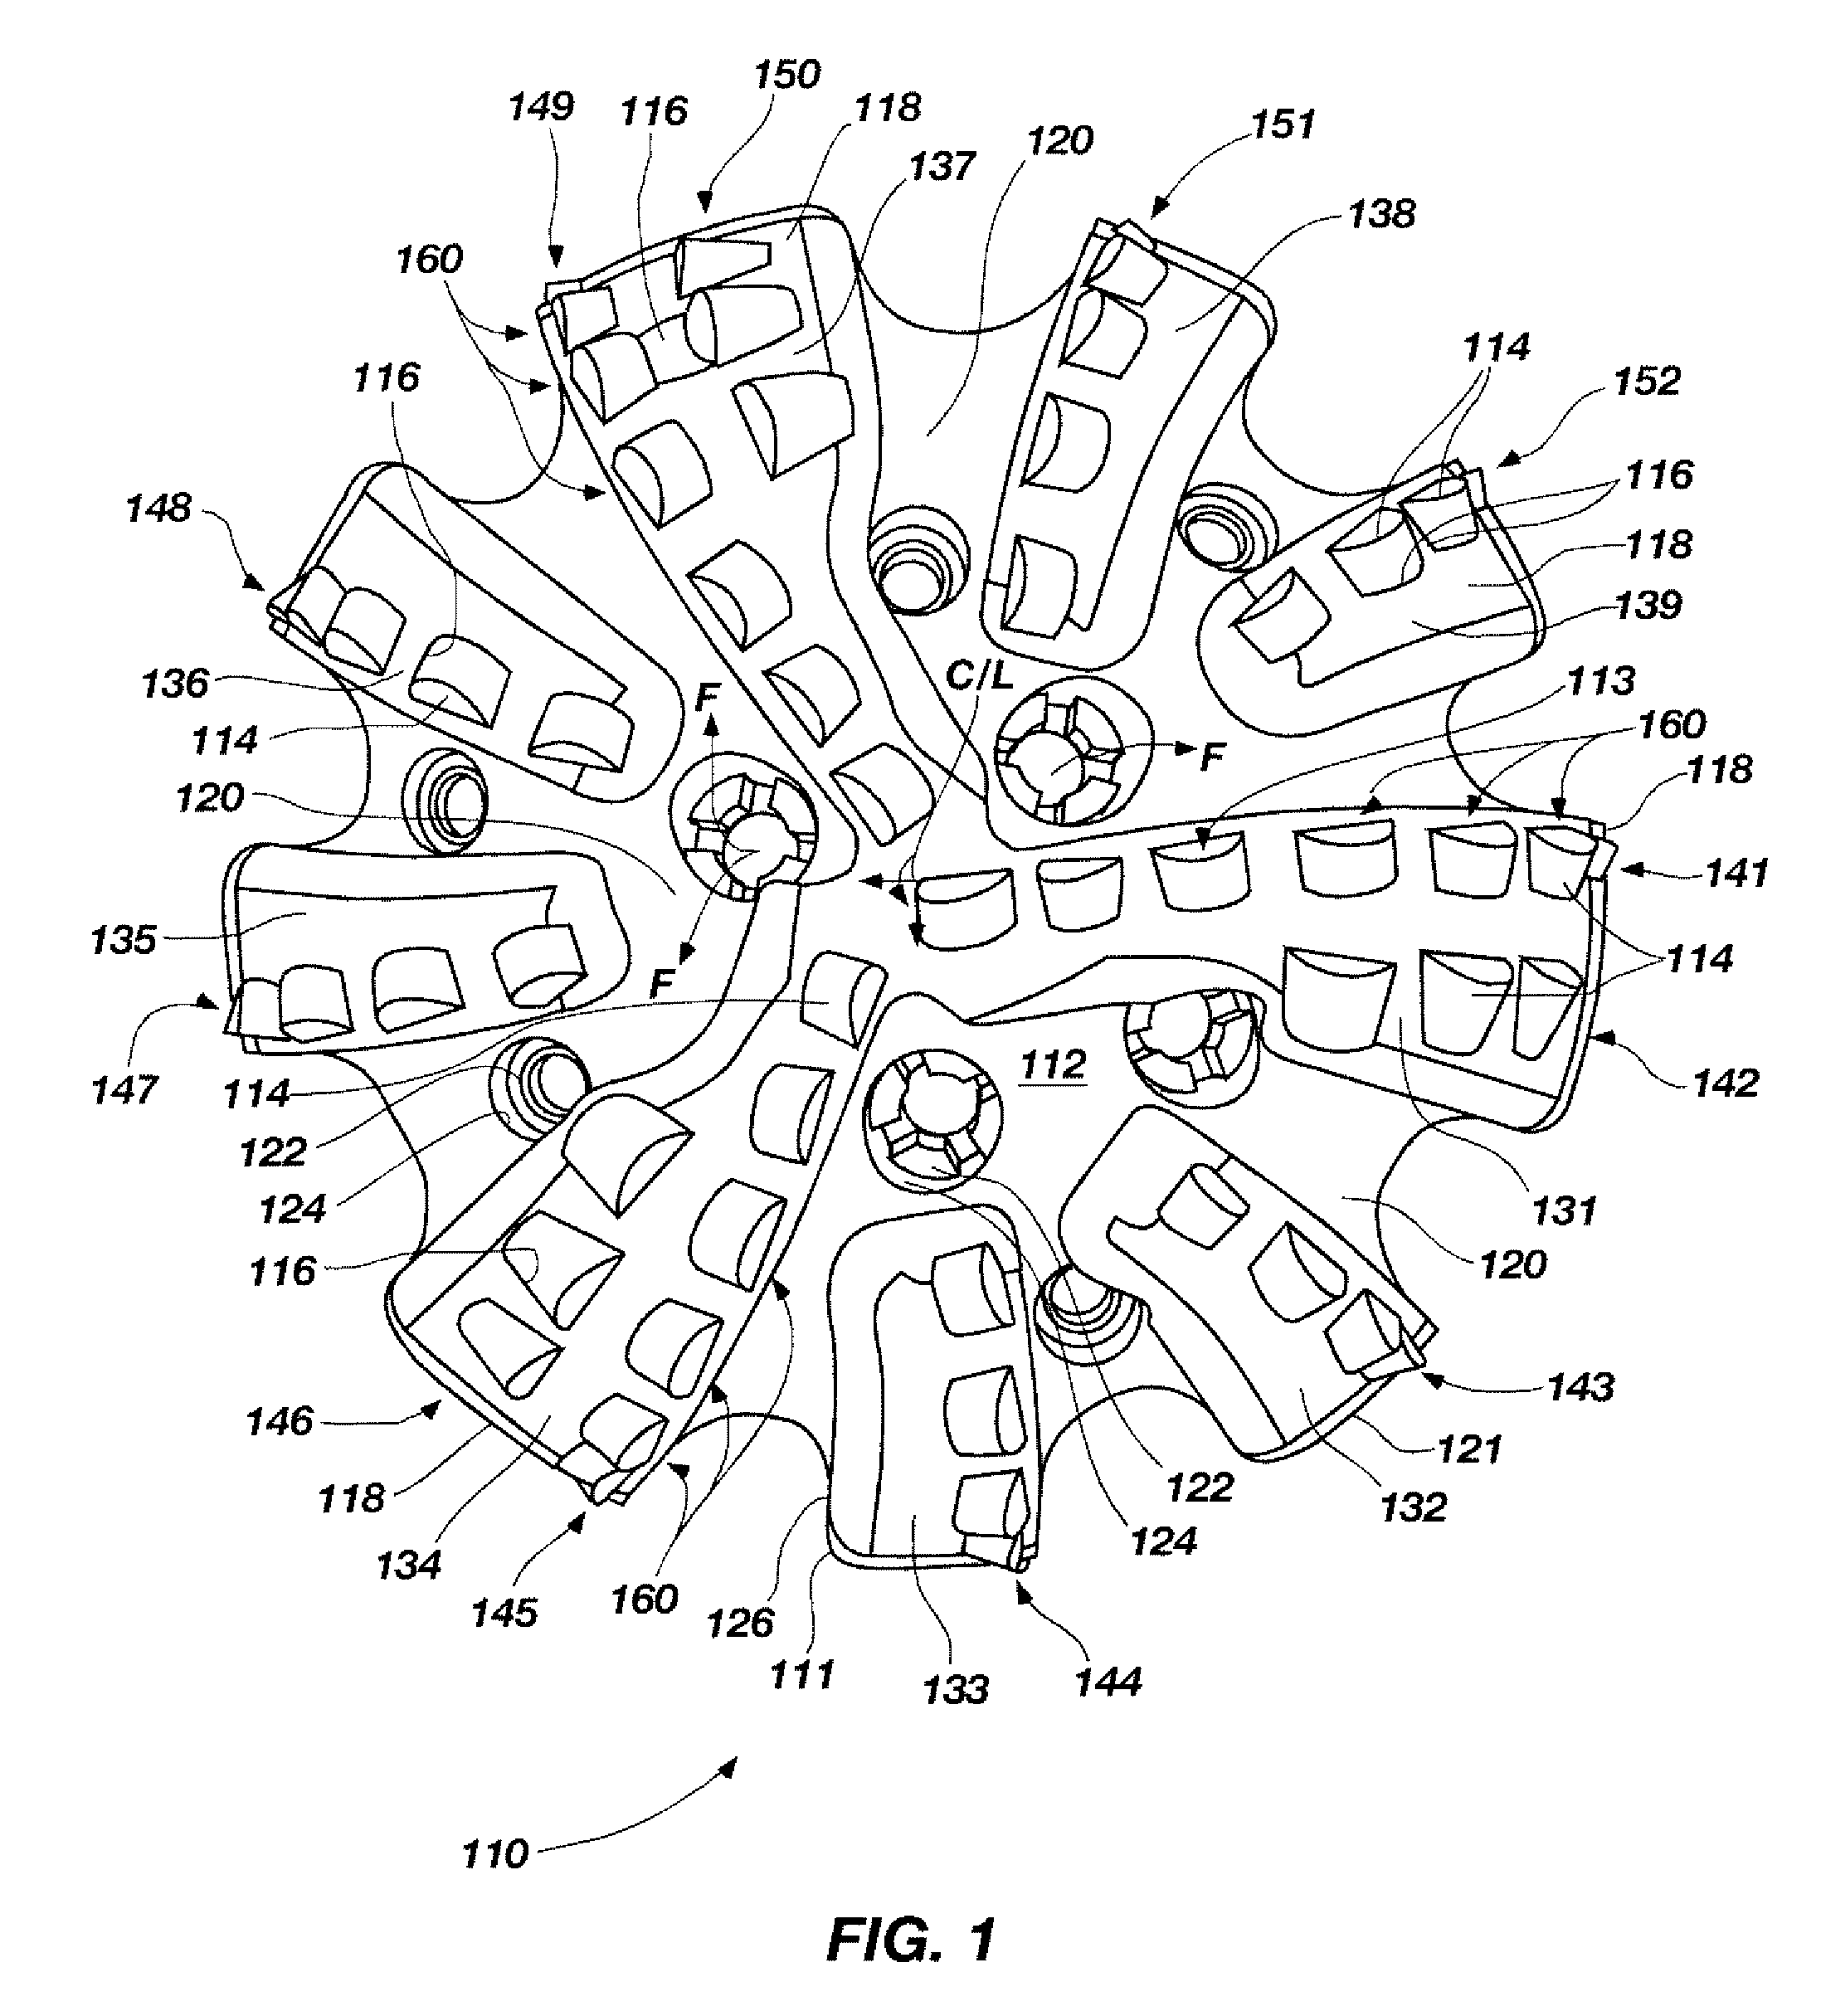 Rotary drag bits having a pilot cutter configuraton and method to pre-fracture subterranean formations therewith